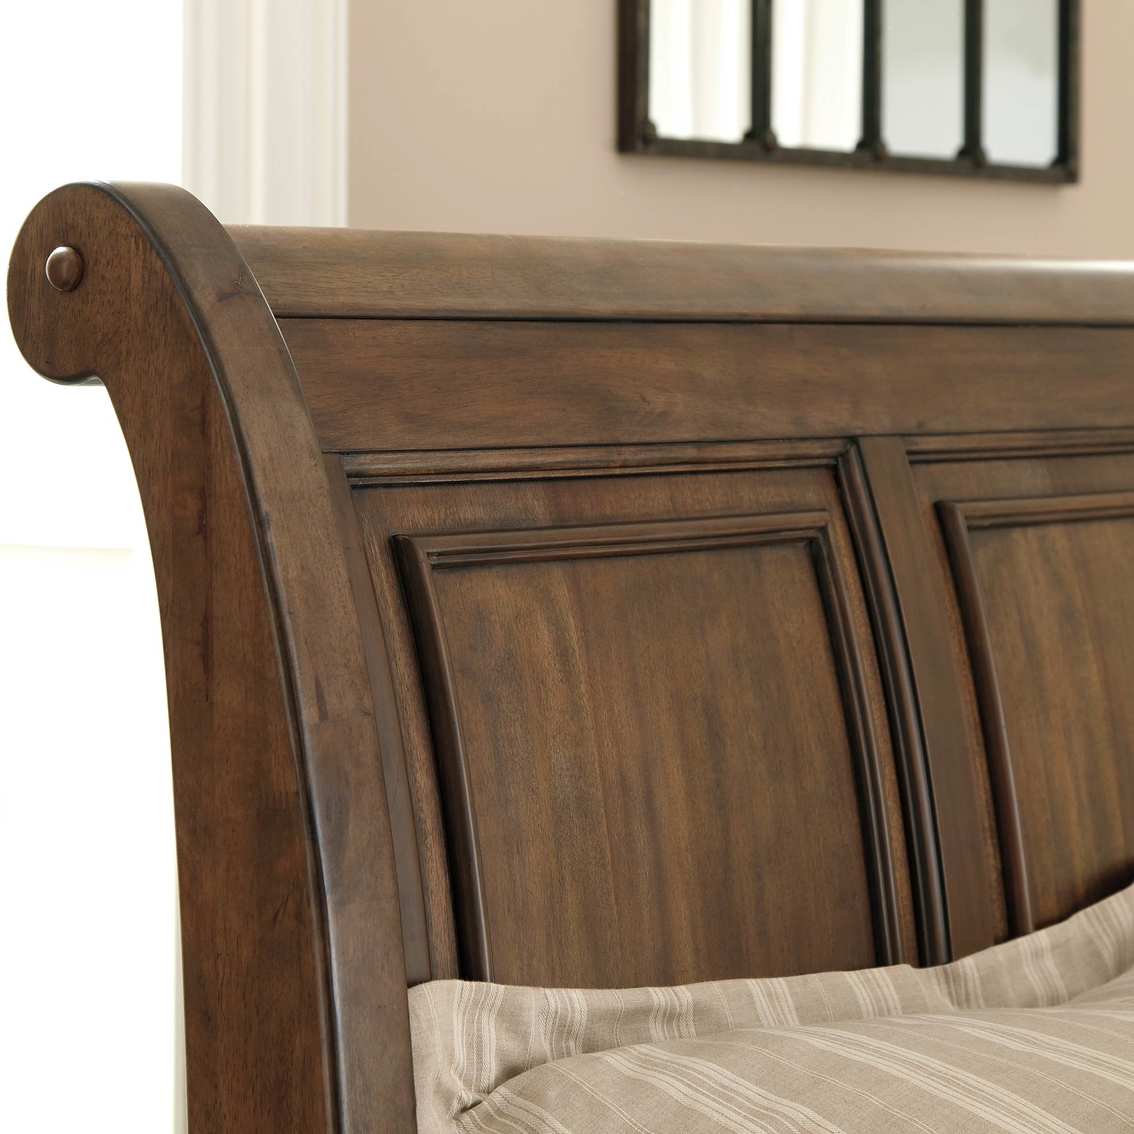 Signature Design by Ashley Flynnter Storage Bed - Image 4 of 4